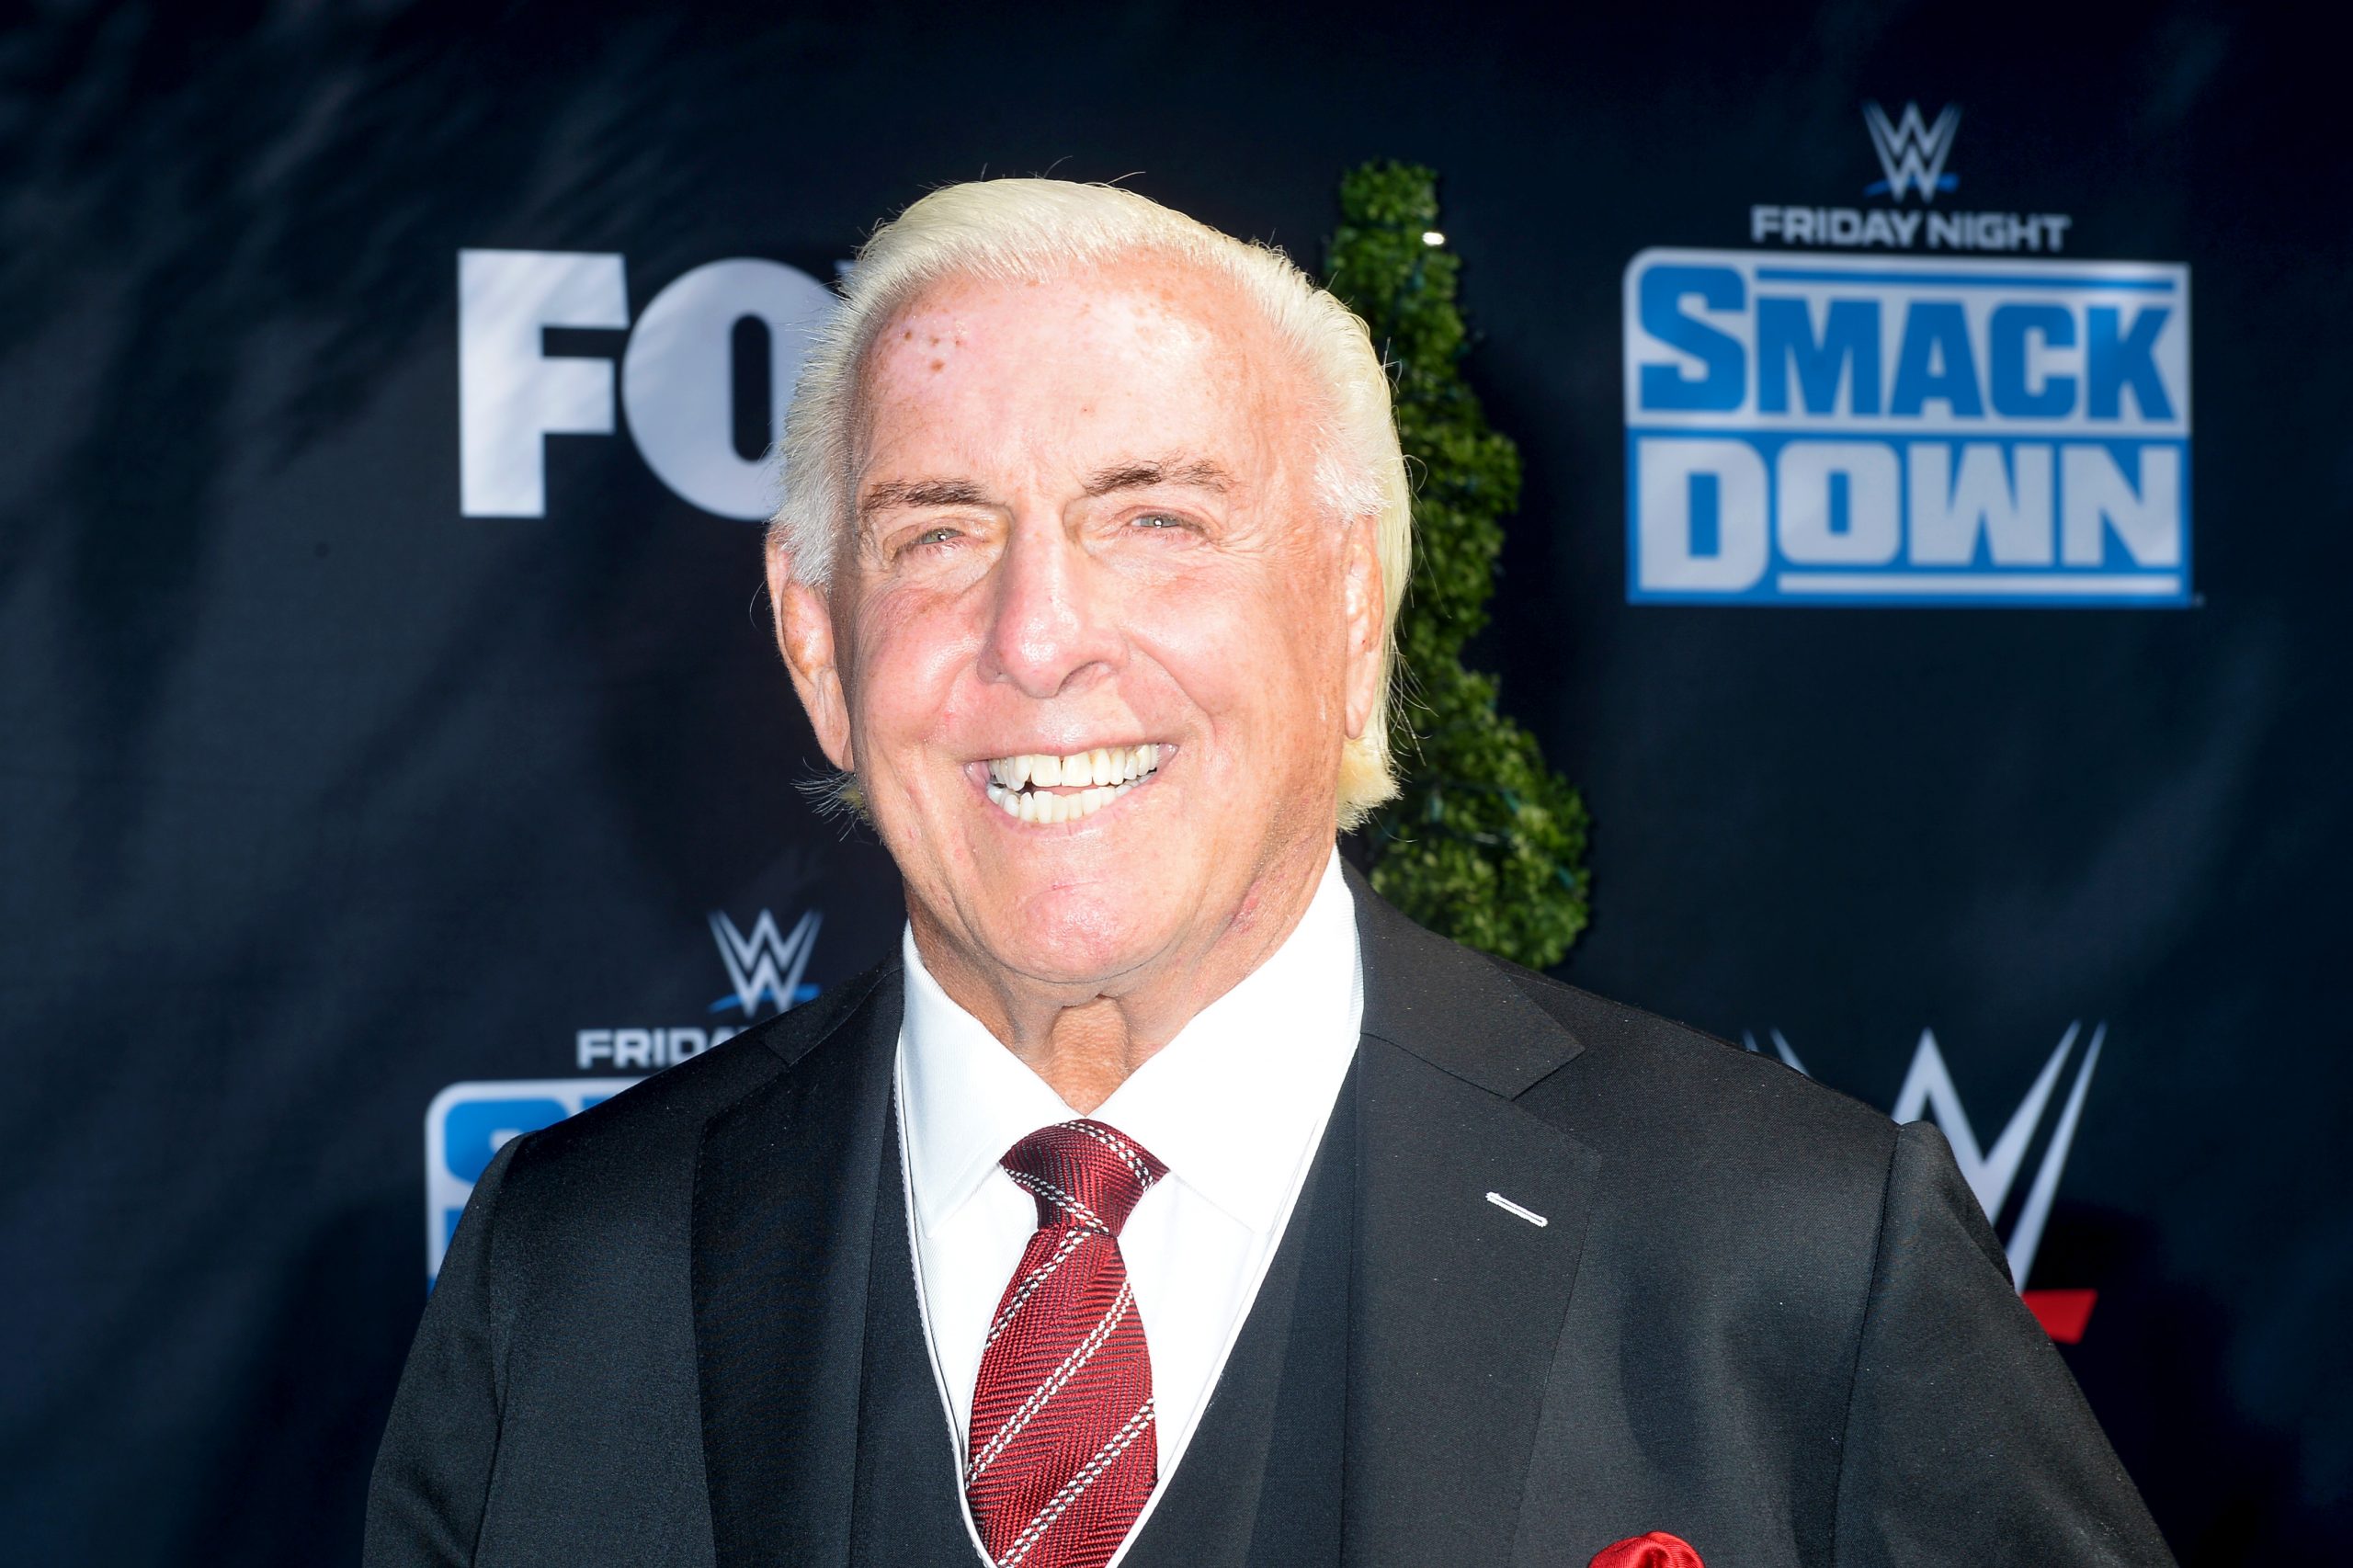 Ric Flair has won many titles during his wrestling career